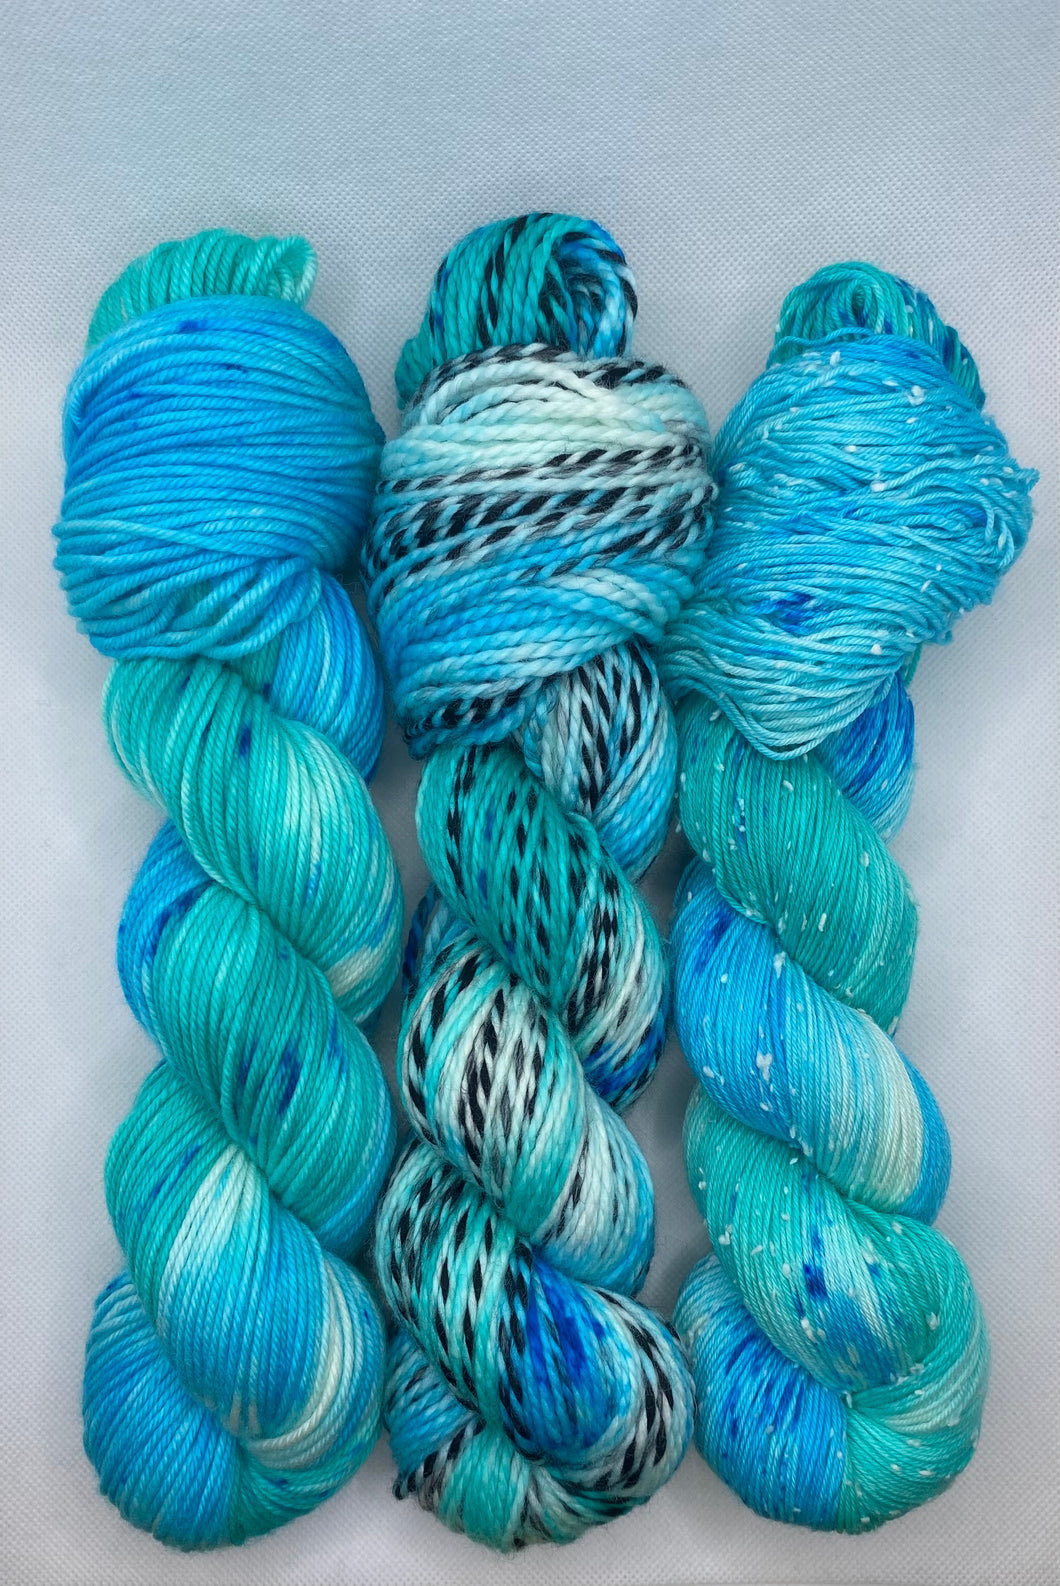 “Ocean” One of a Kind Hand Dyed Yarn